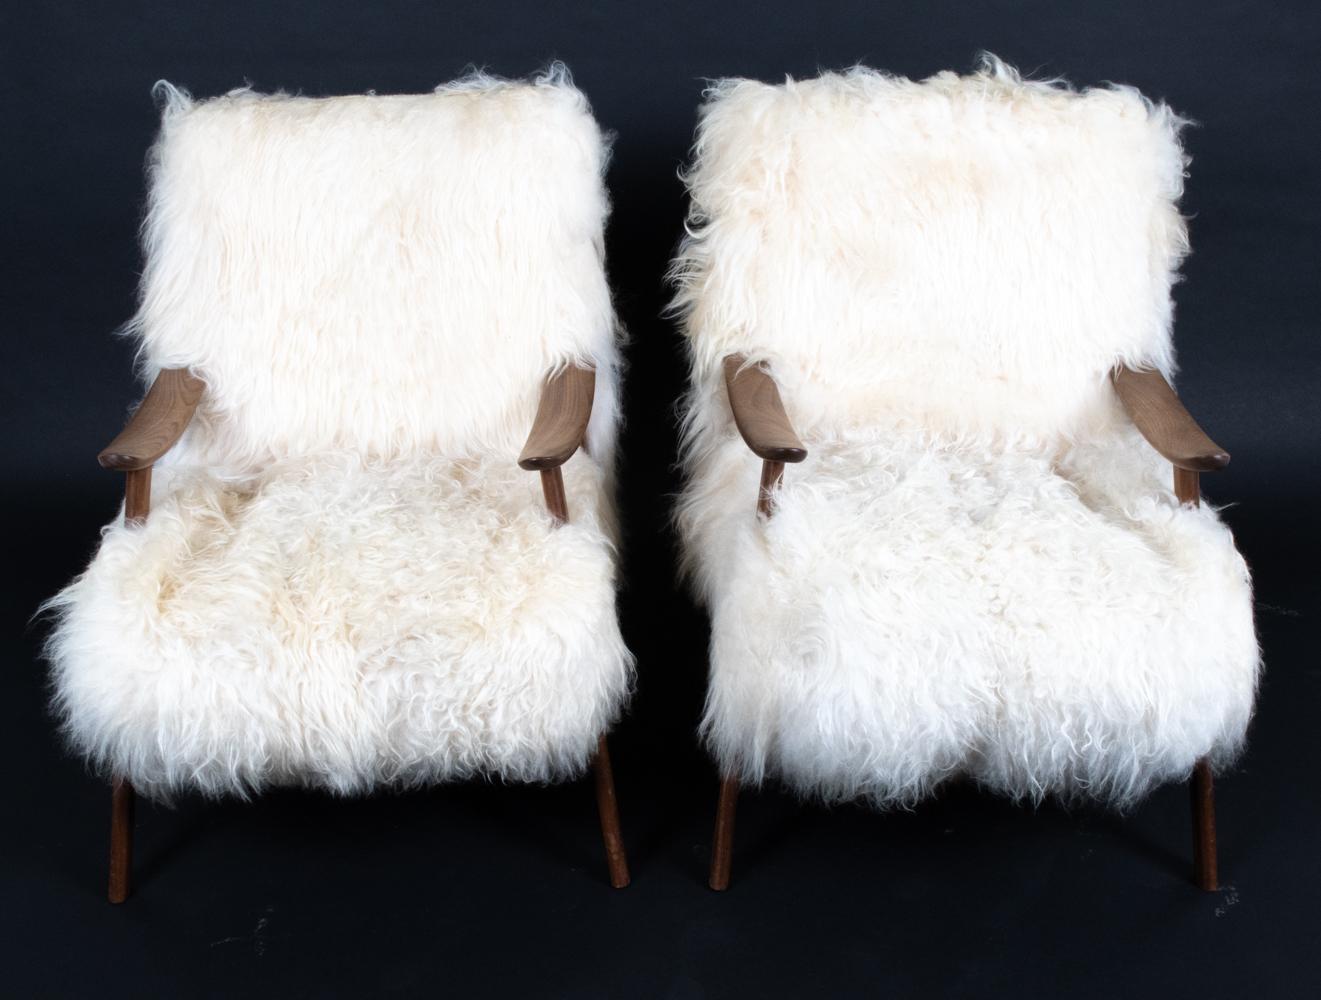 Relax in sheer bliss with this rare and exquisite pair of Danish mid-century easy chairs and footstools. Upholstered in shaggy, plush white Mongolian sheepskin, these chairs provide a lap of luxury to sink into with matching ottomans to kick your